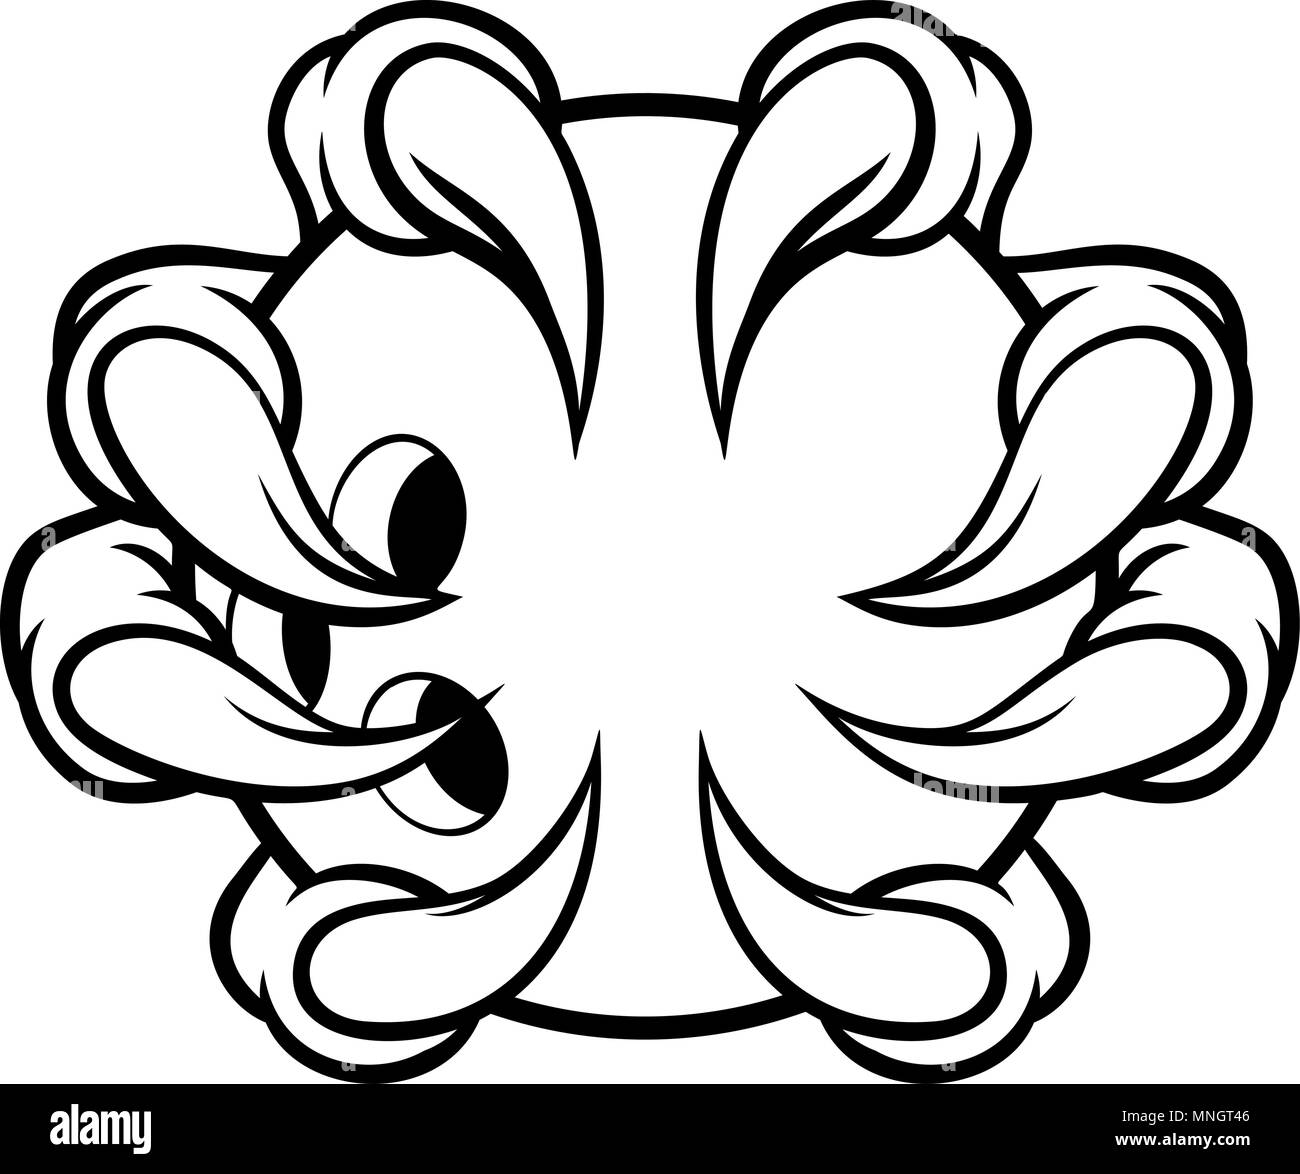 Monster animal claw holding Ten Pin Bowling Ball Stock Vector